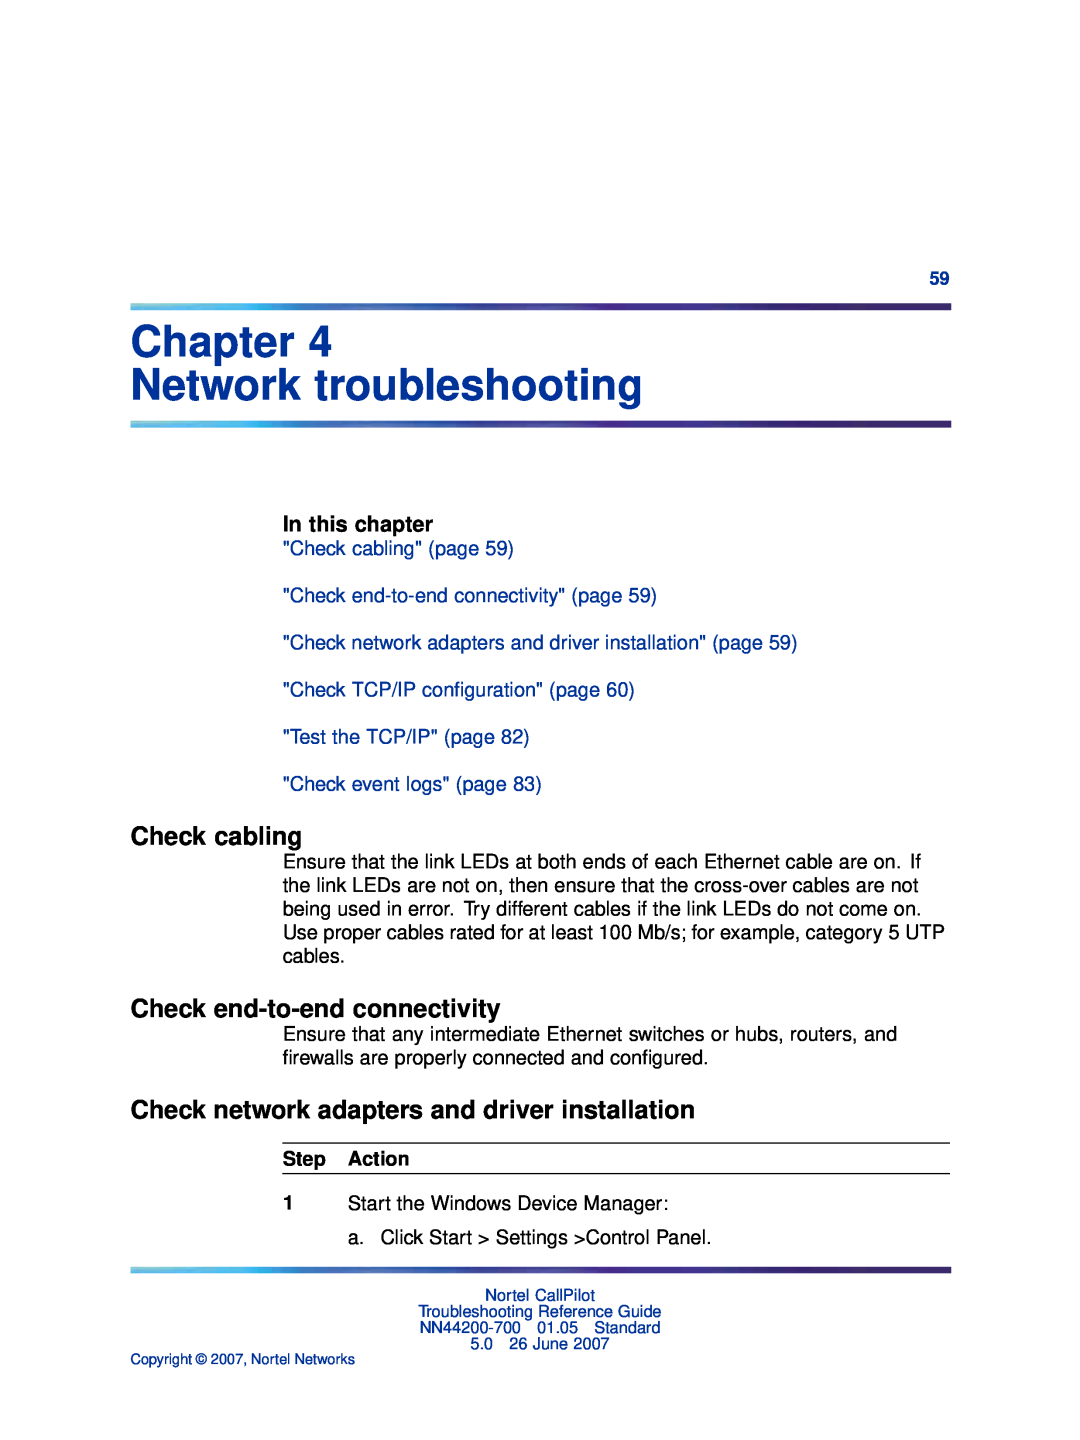 Nortel Networks NN44200-700 Chapter Network troubleshooting, Check cabling, Check end-to-end connectivity, In this chapter 